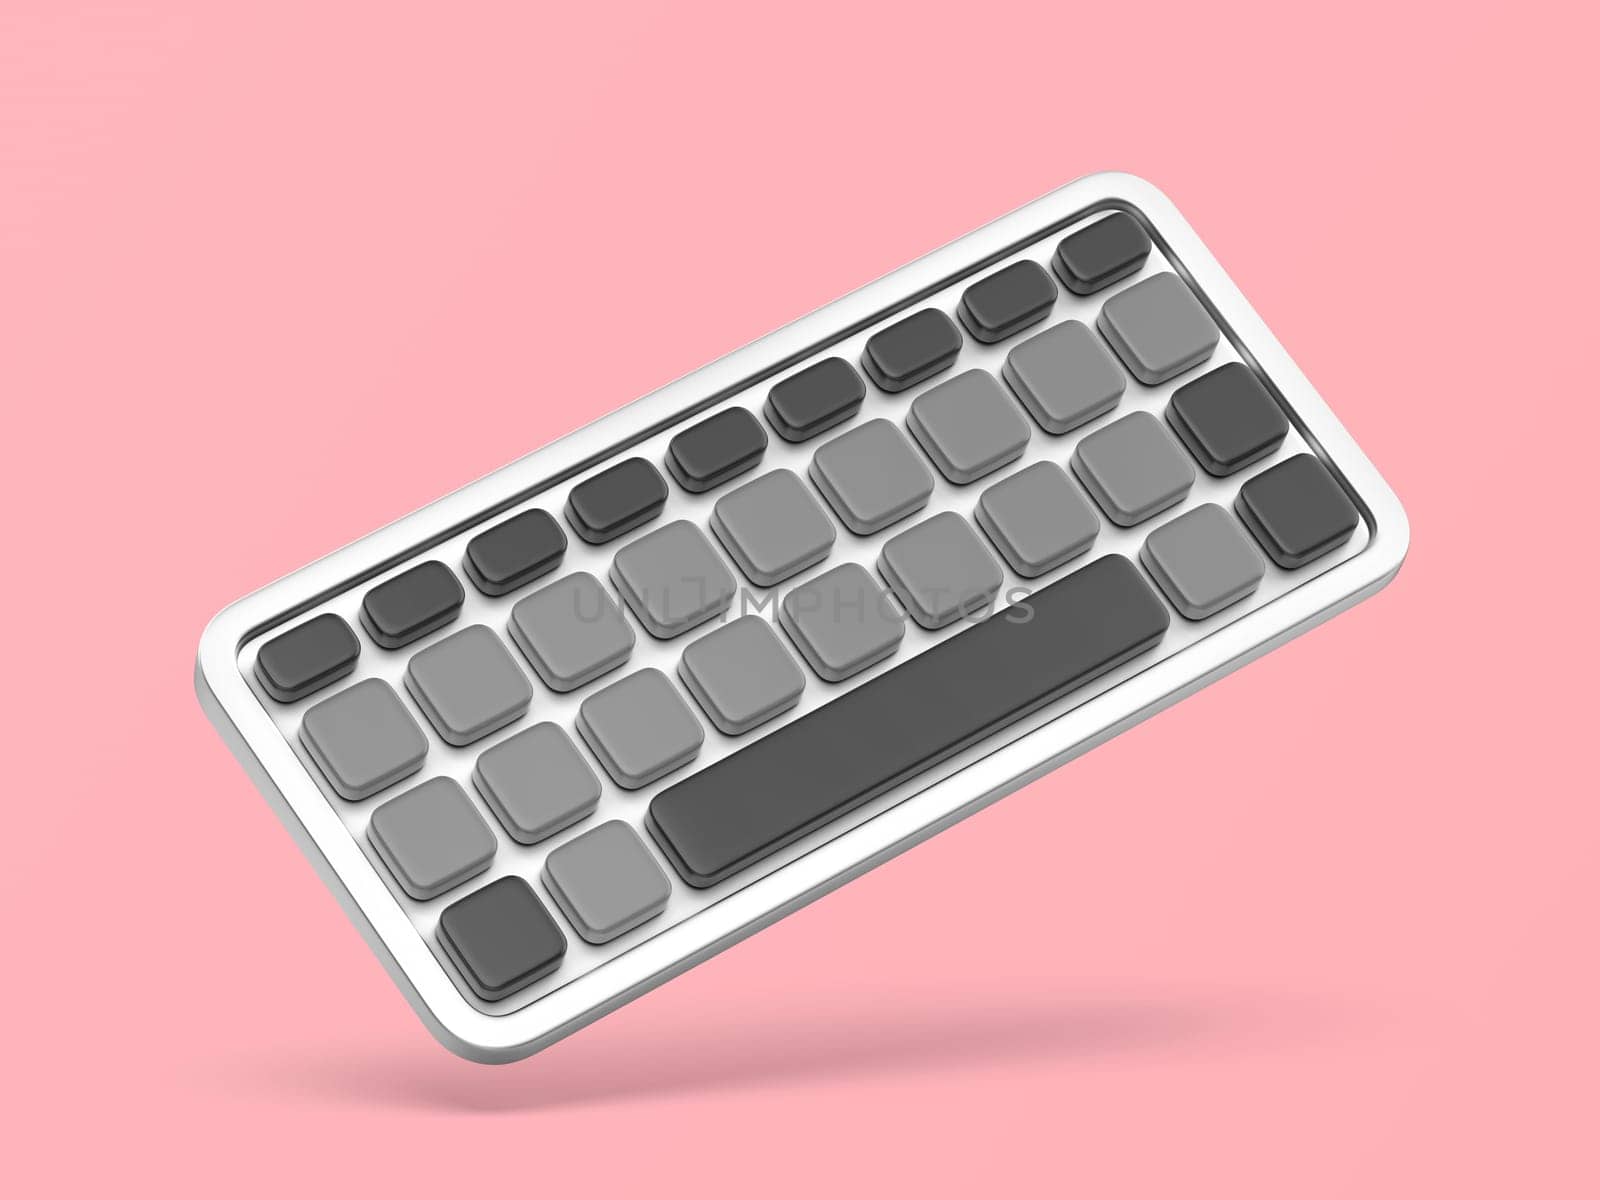 Wireless computer keyboard by magraphics